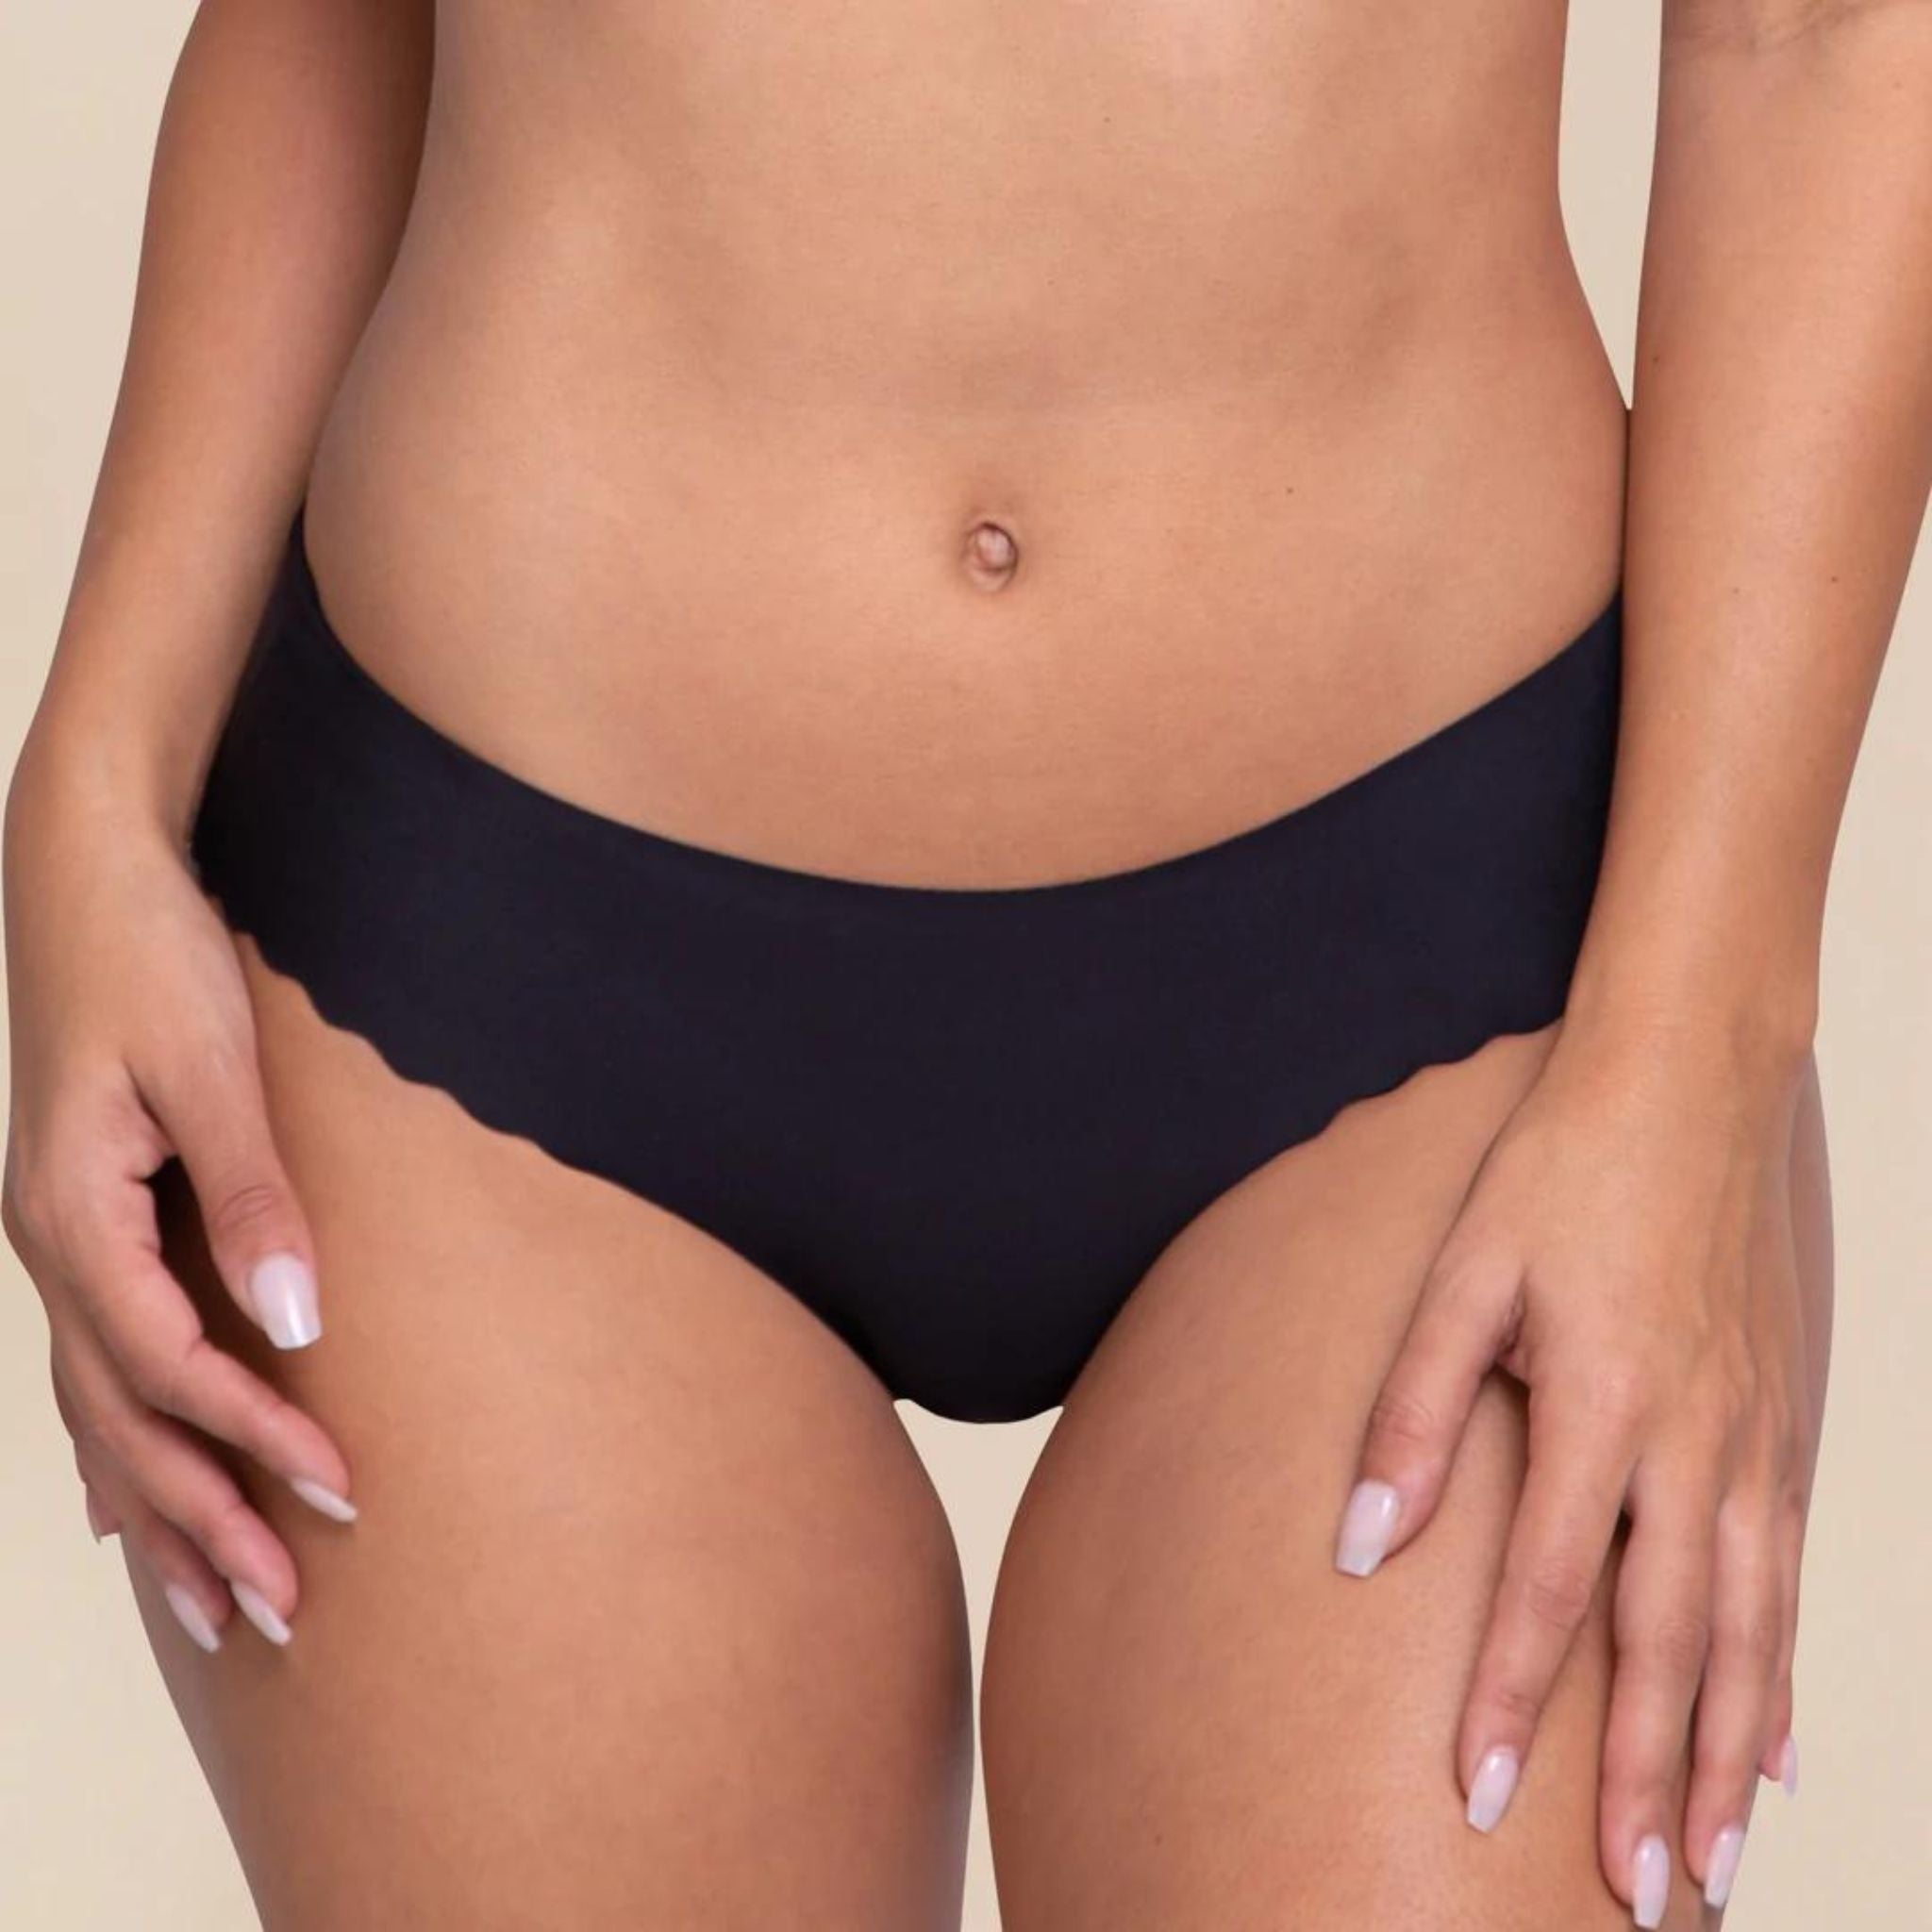 The Everyday Undie provides invisible protection and is made with breathable microfiber to eliminate panty lines. Created with delicate, scalloped edges, these undies are so comfy they feel like a second skin!